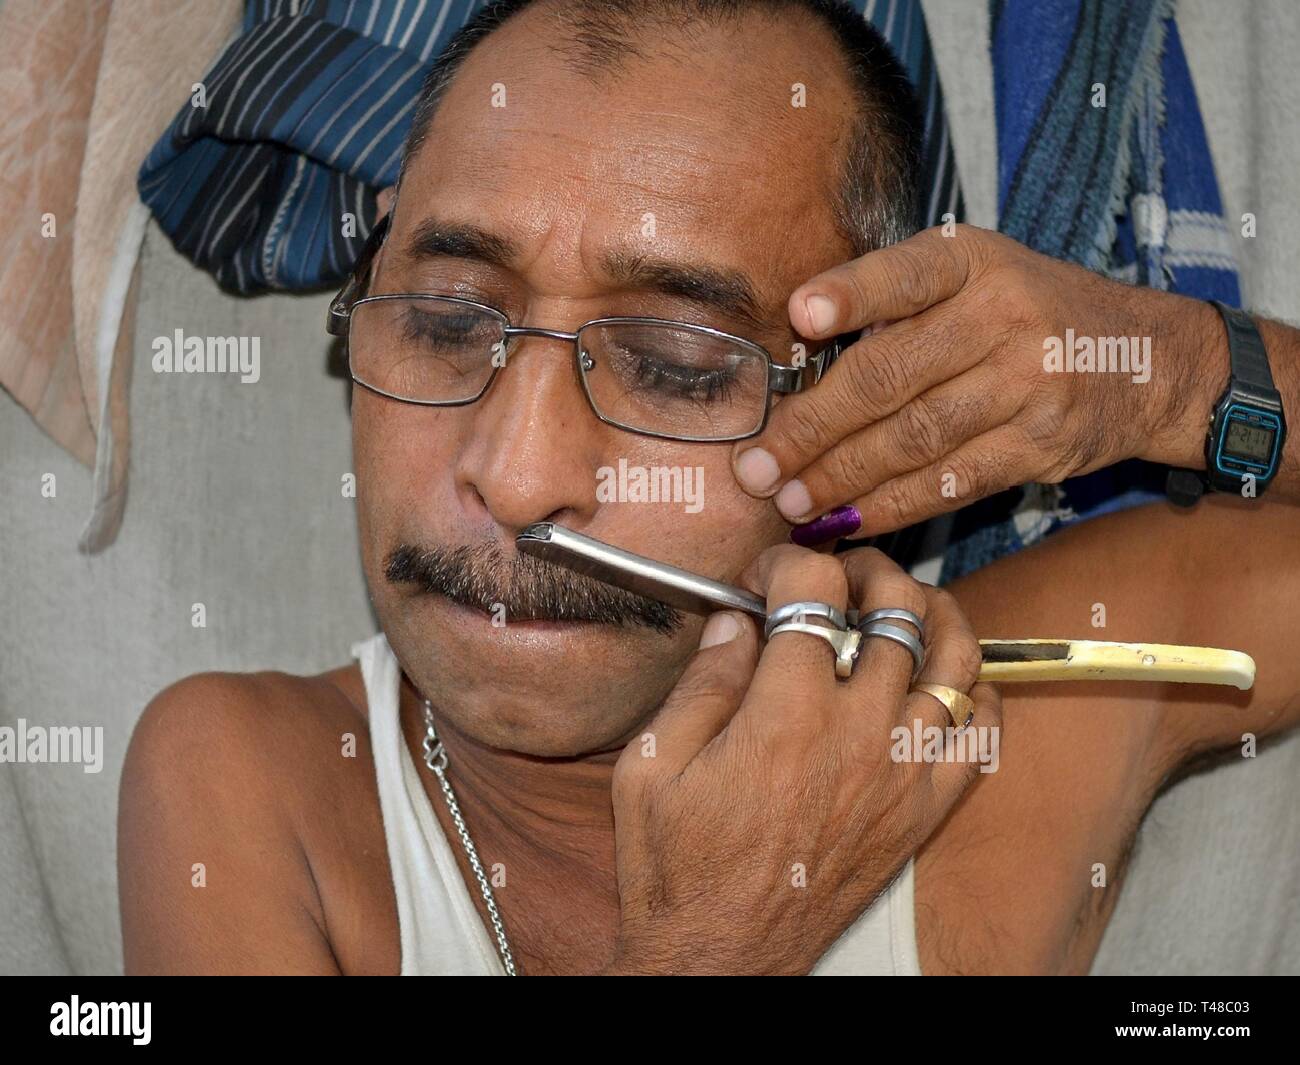 Funny Indian curbside barber with puffed up cheeks trims his ...